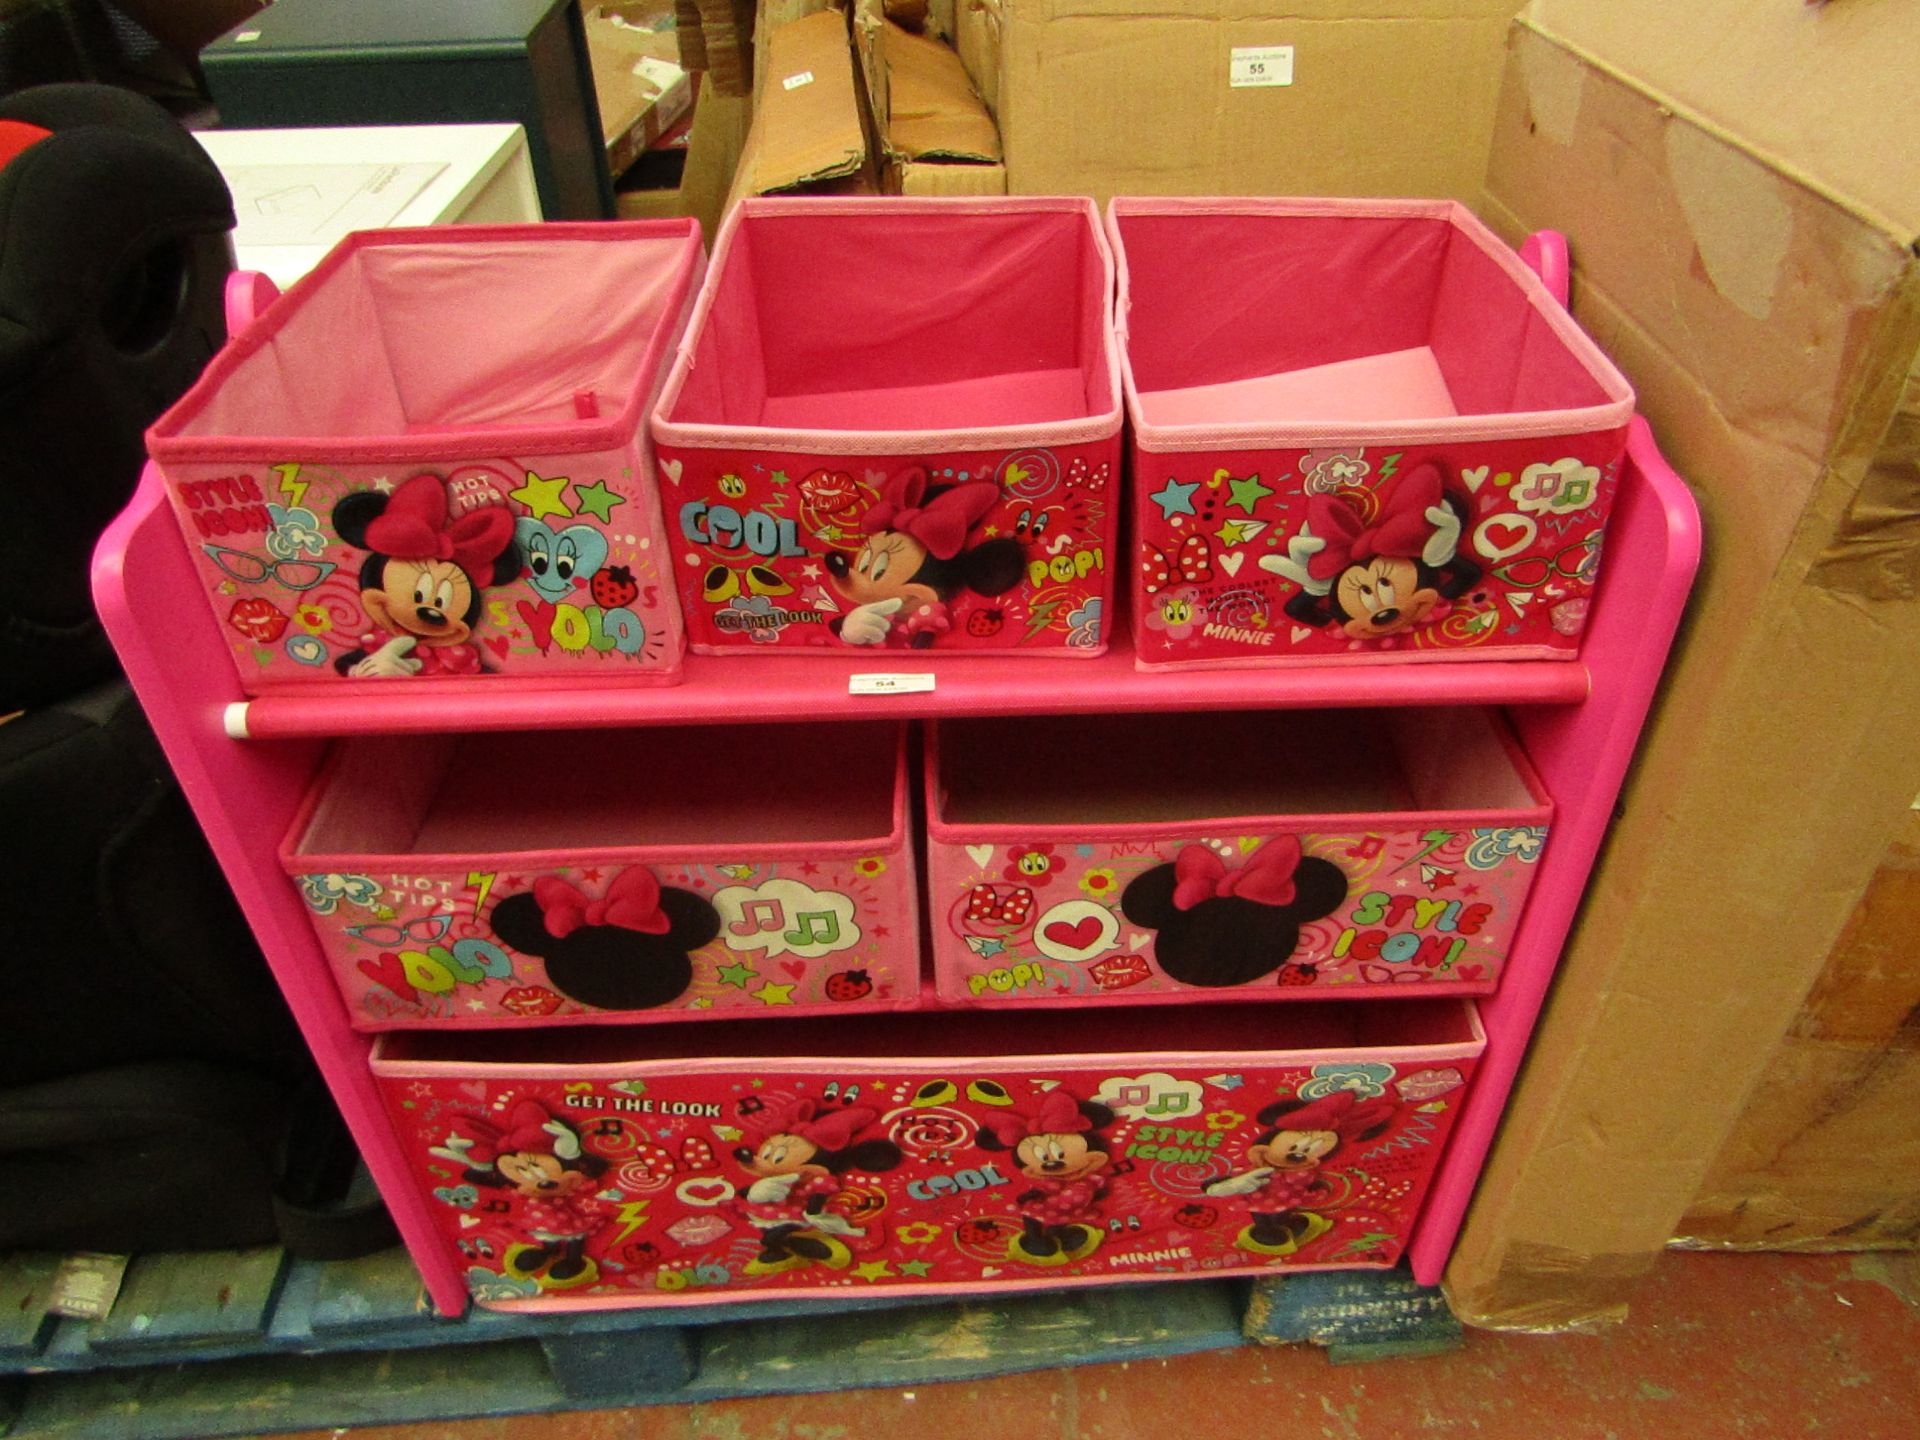 Disney - Minnie Mouse - Wooden Toy Storage - Item Is Complete & Assembled.